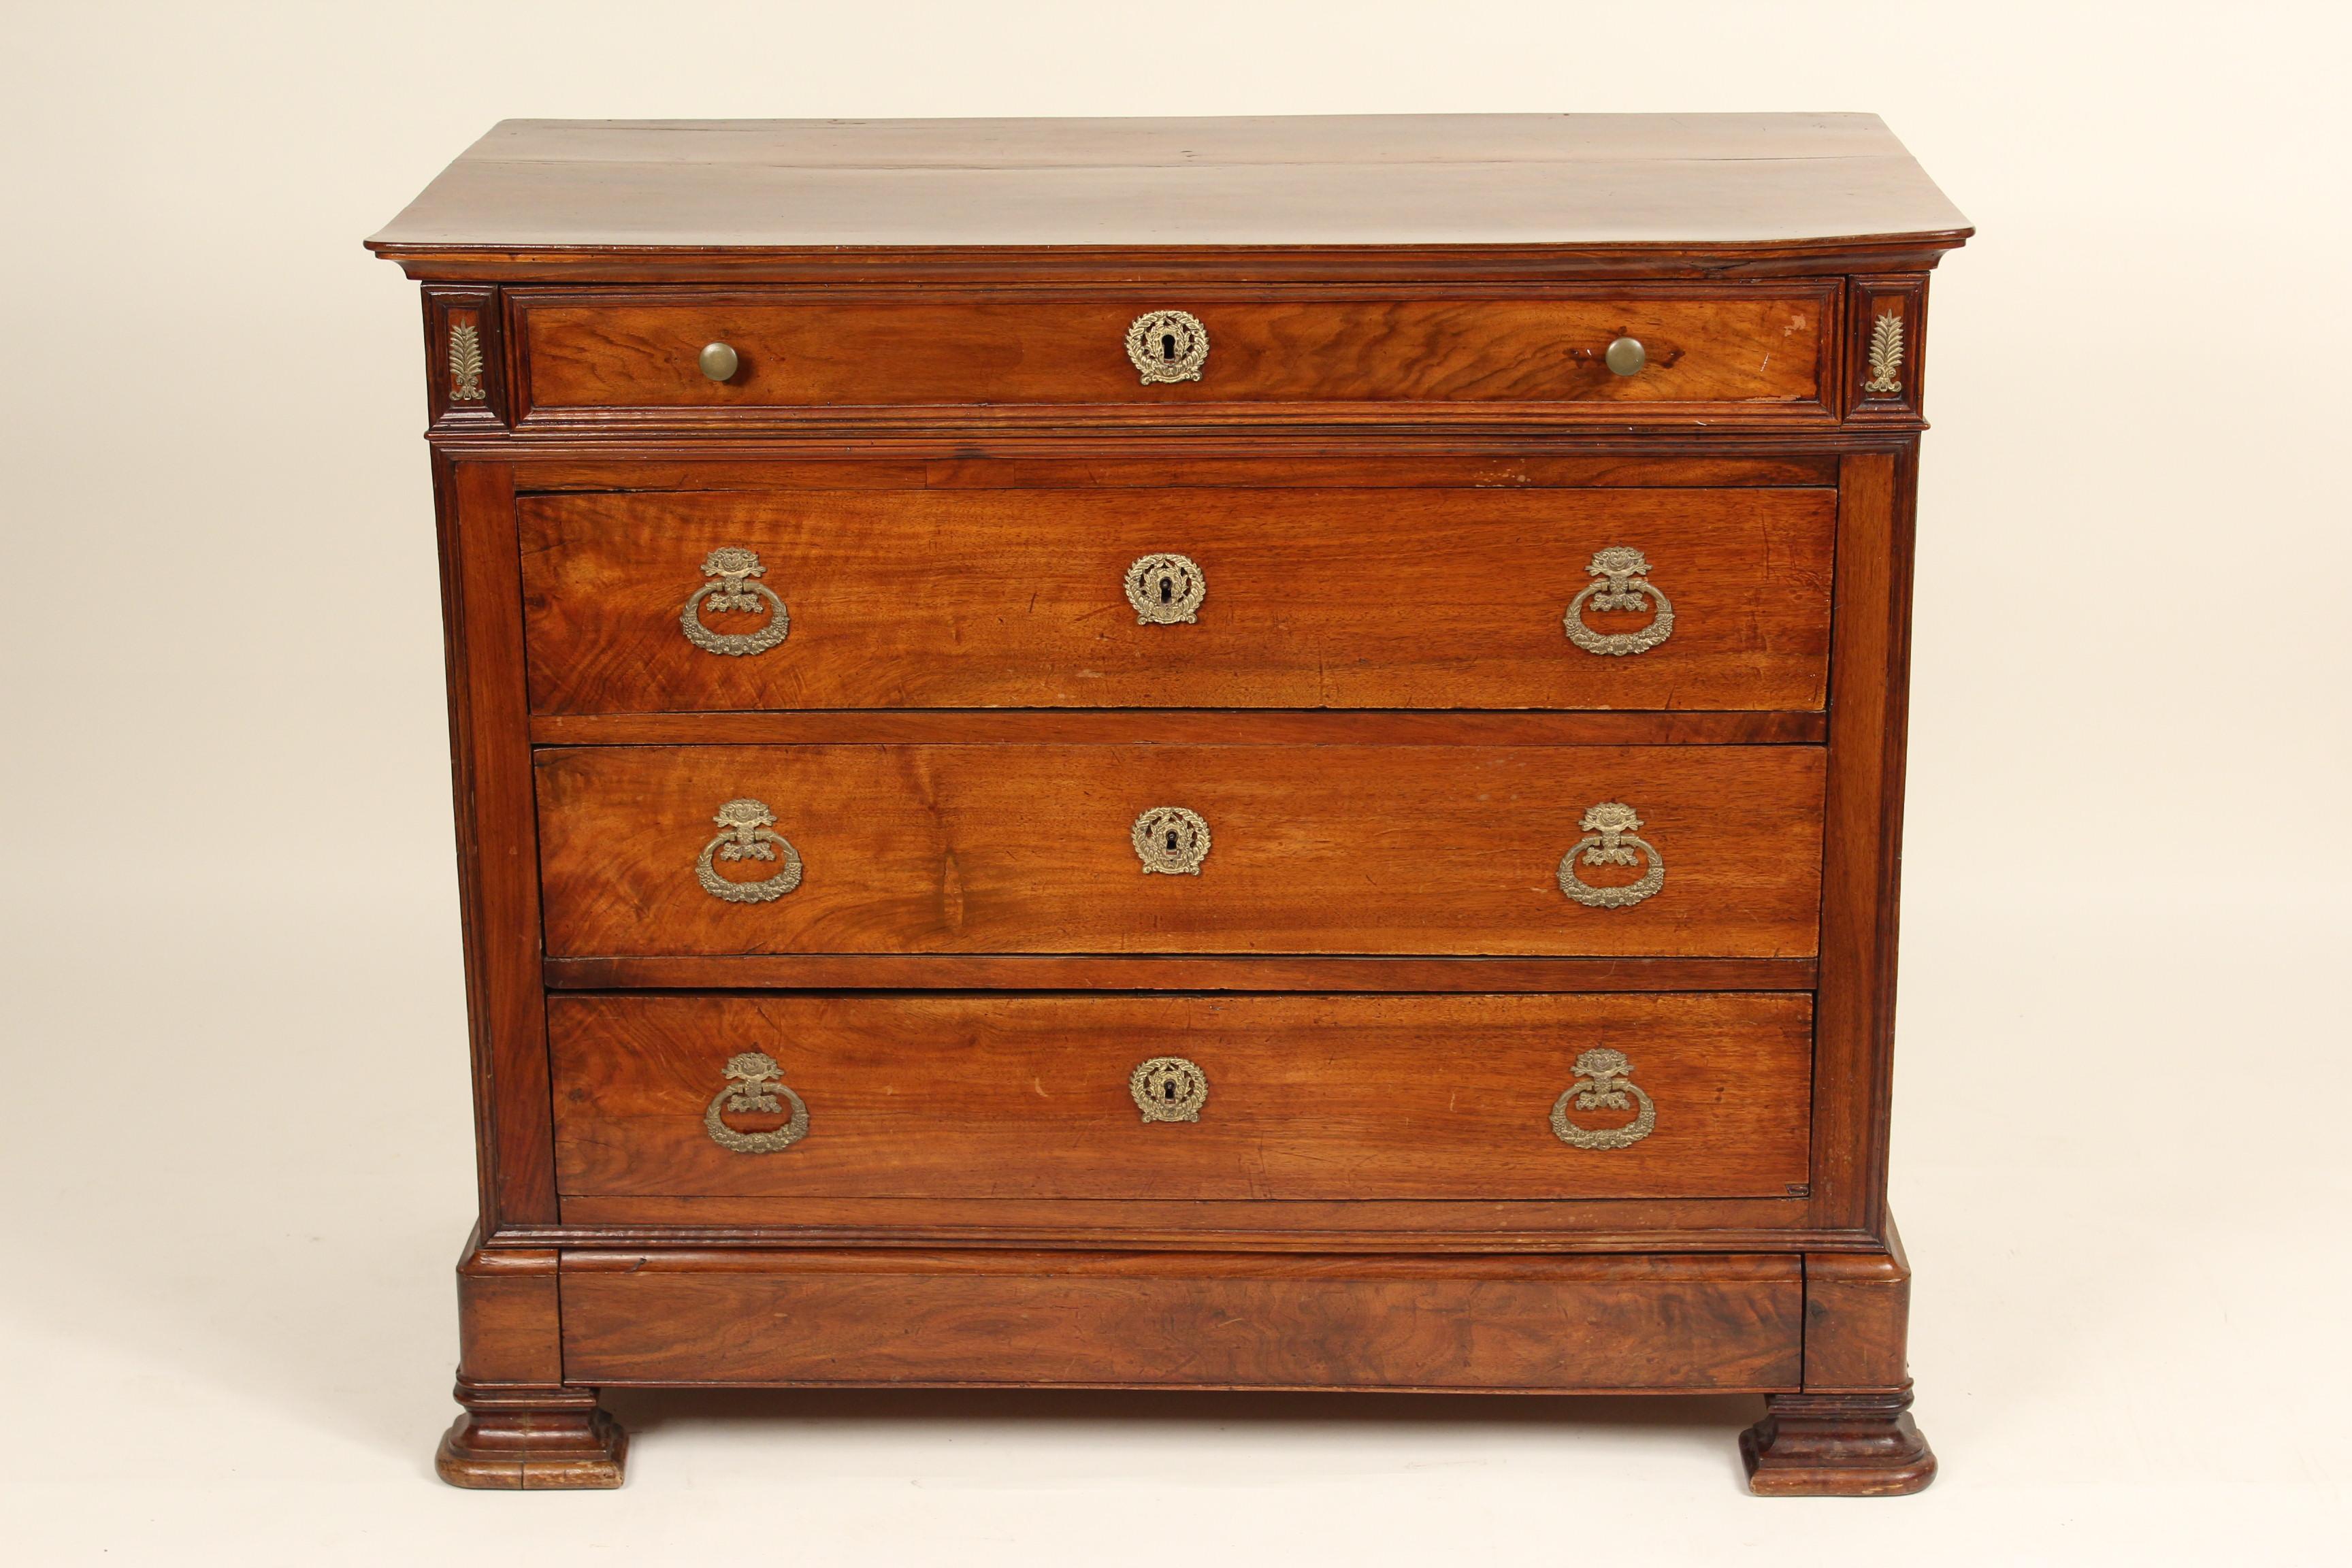 Louis Philippe mahogany chest of drawers with gilt bronze hardware, circa 1840. The mahogany used on this chest has excellent color, grain and patina. The bronze hardware is very fine quality.